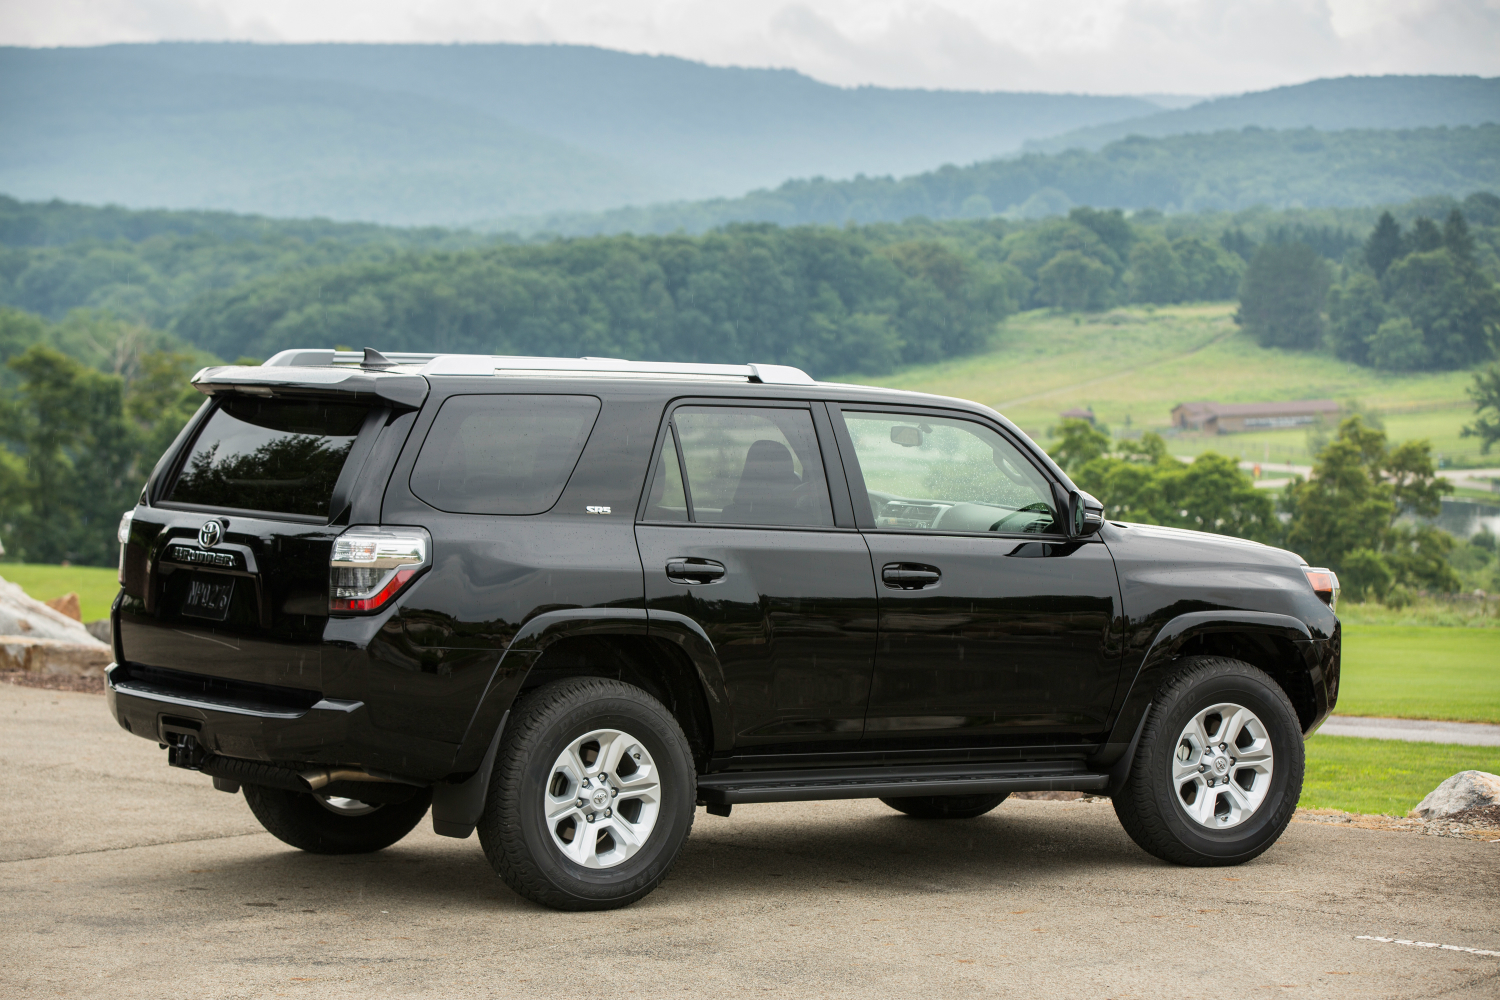 2018 toyota 4runner specs release date price performance 04